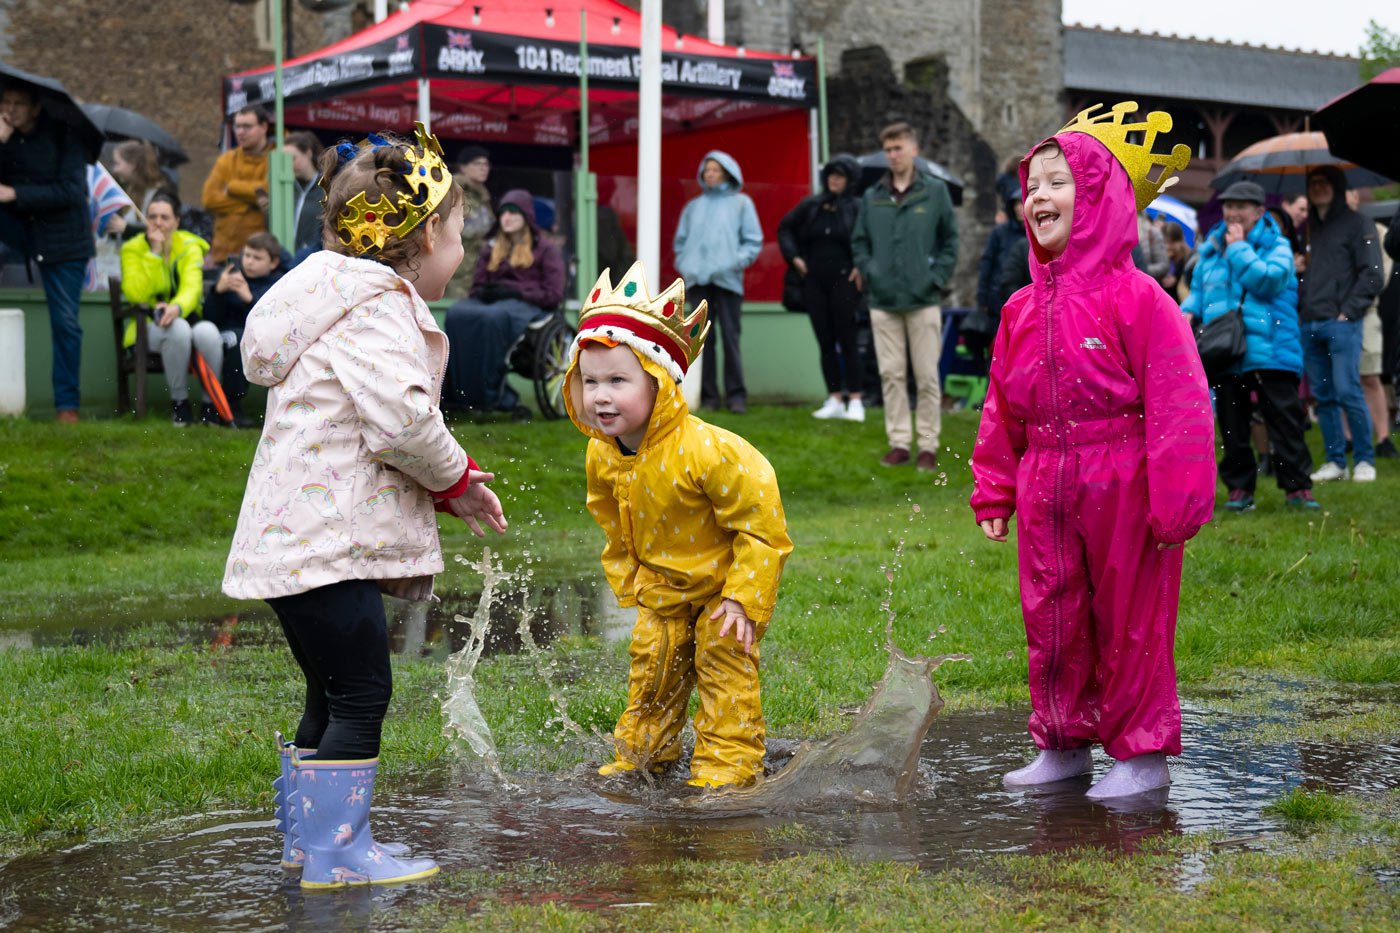 Children play in the grounds of Cardiff Castle during the coronation ceremony